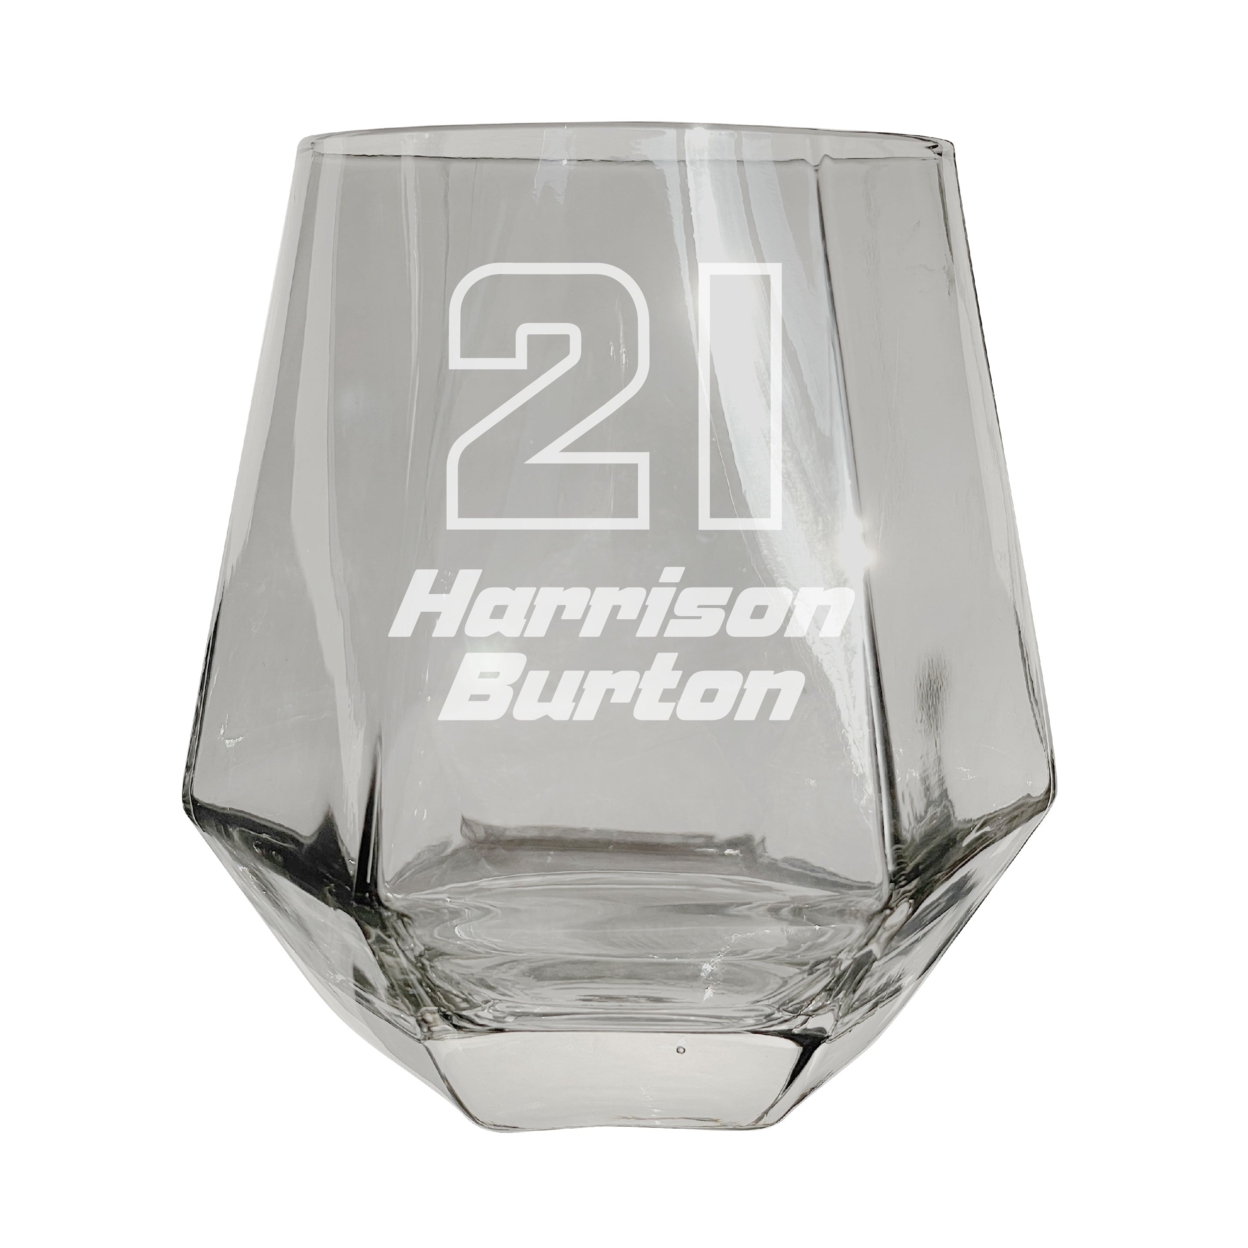 #21 Harrison Burton Officially Licensed 10 Oz Engraved Diamond Wine Glass - Clear, 2-Pack